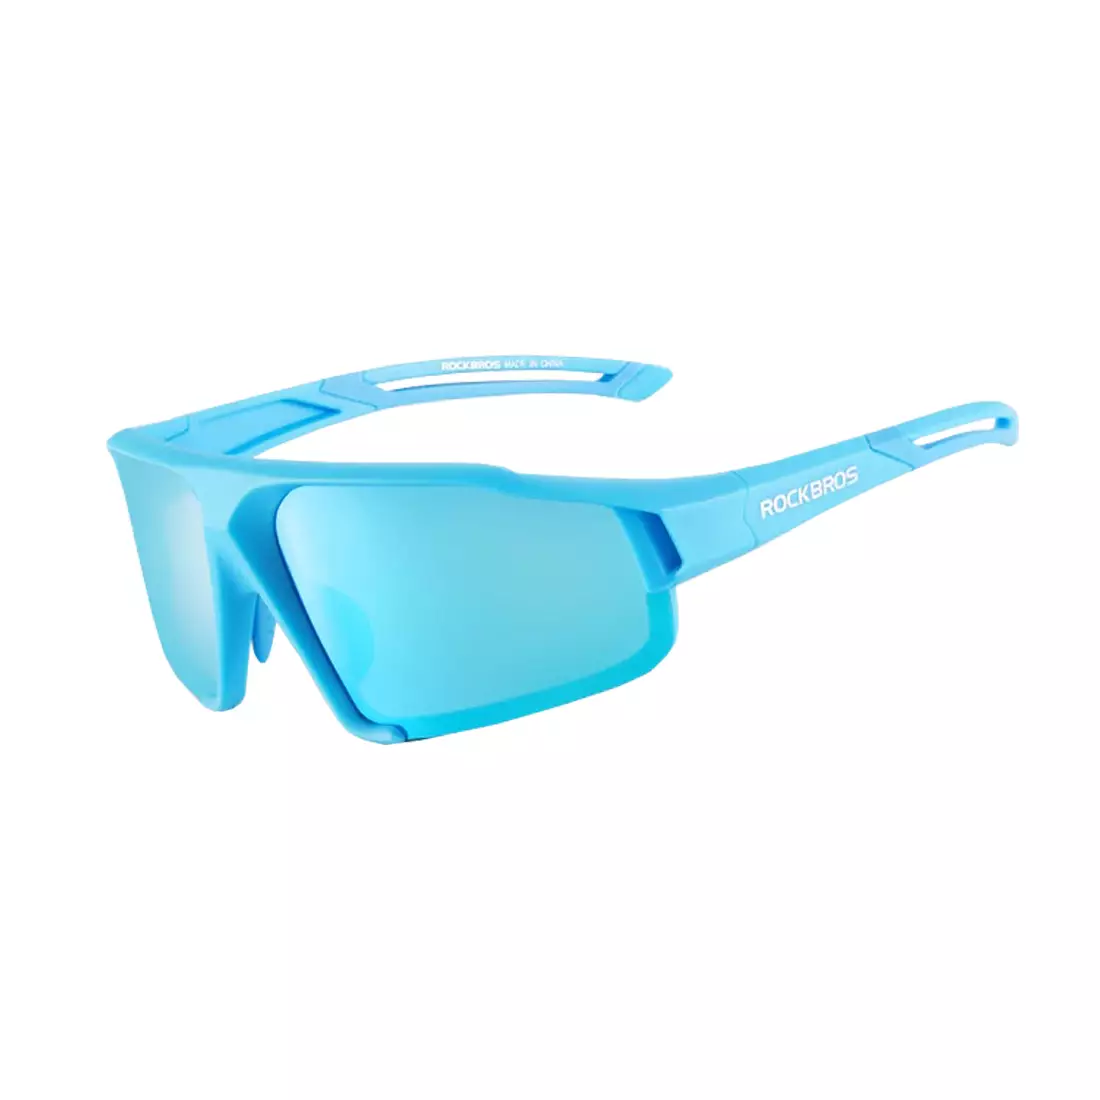 Rockbros SP216BB bicycle / sports glasses with polarized lens blue